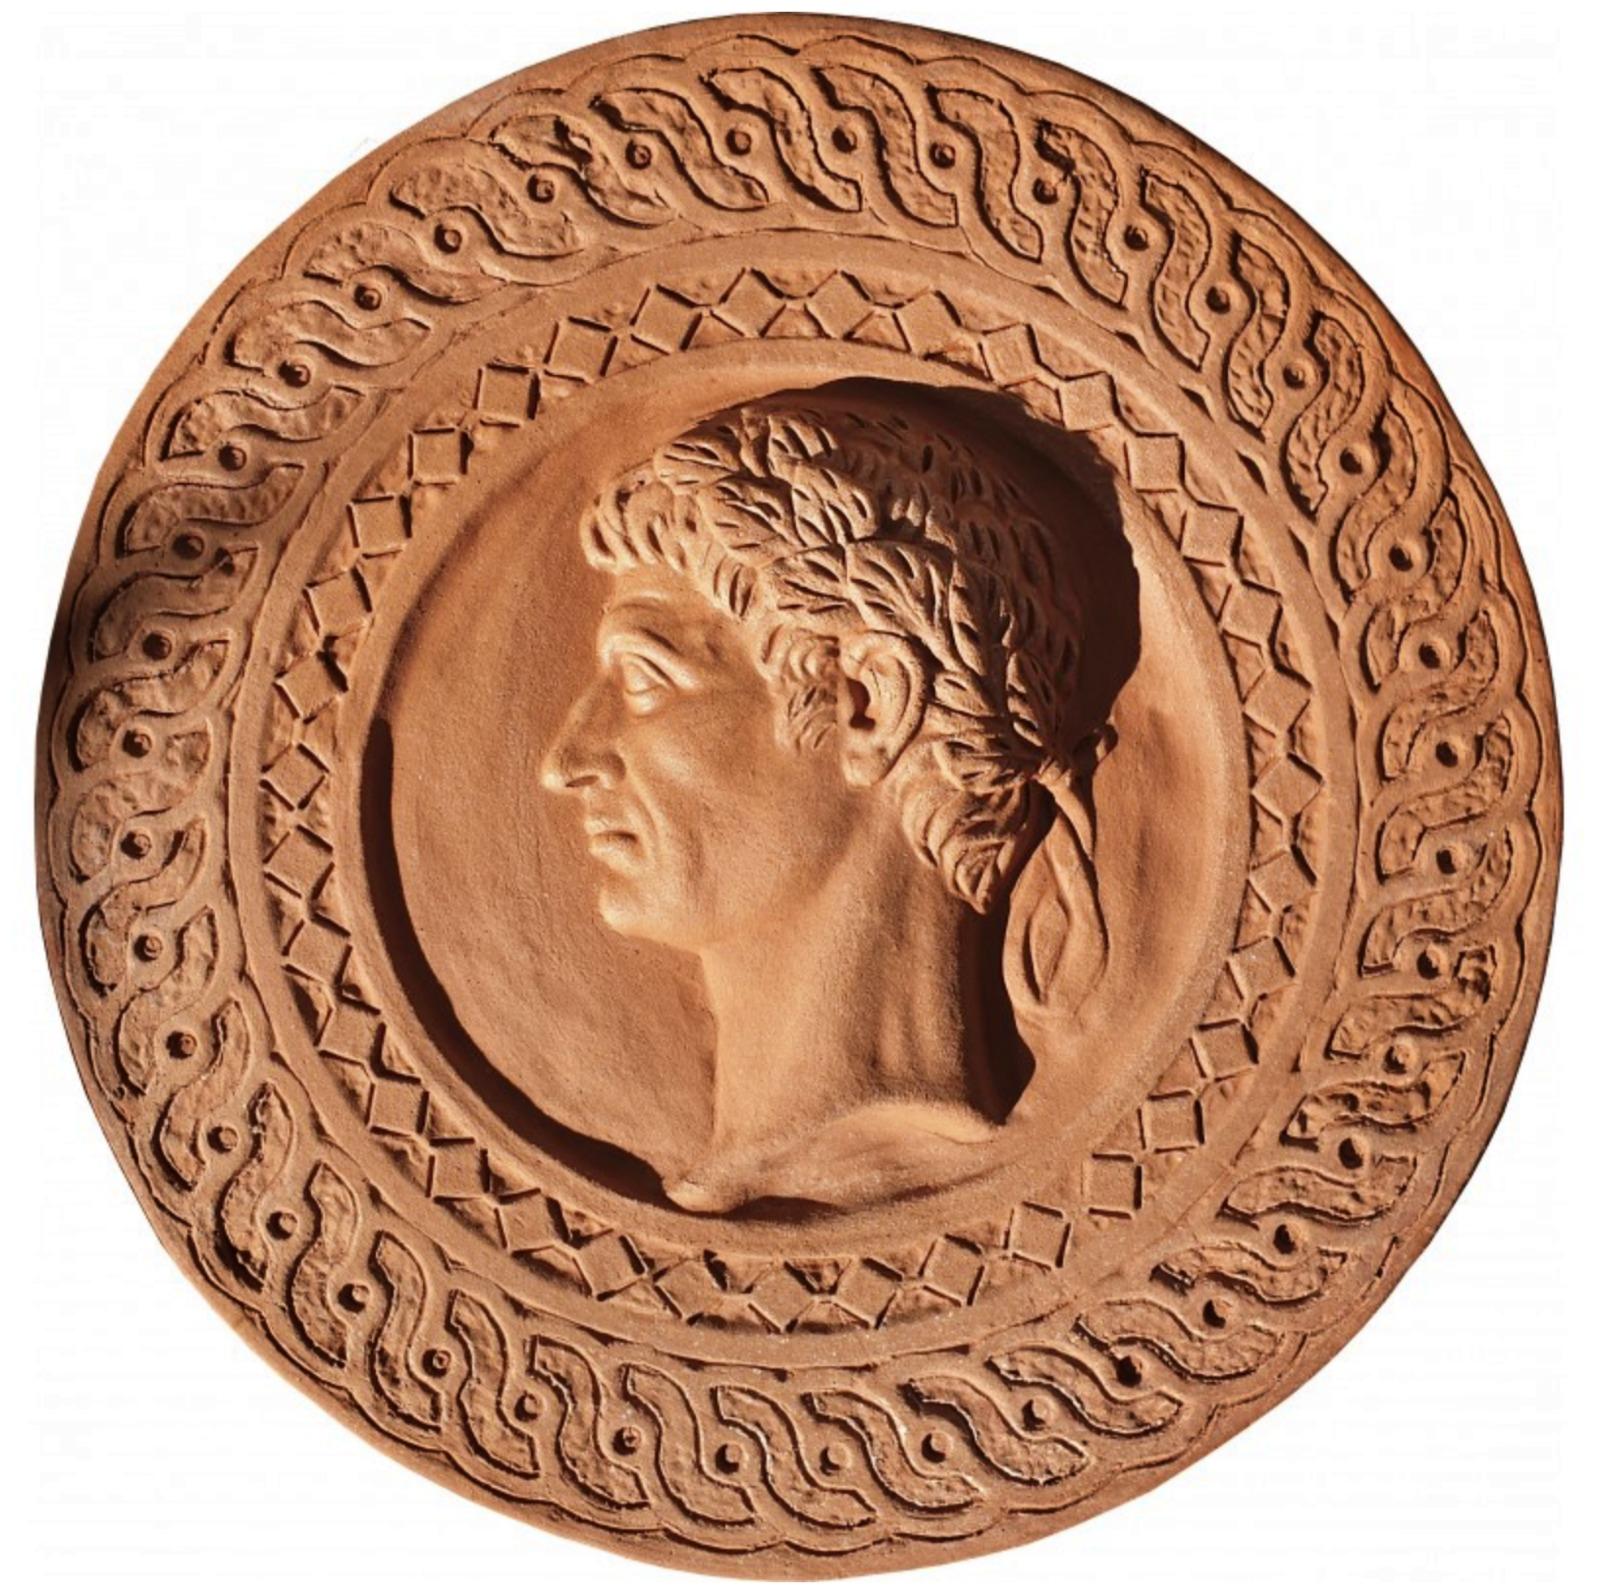 Hand-Crafted Tond of Giulio Cesare in Impruneta Terracotta Early 20th Century For Sale